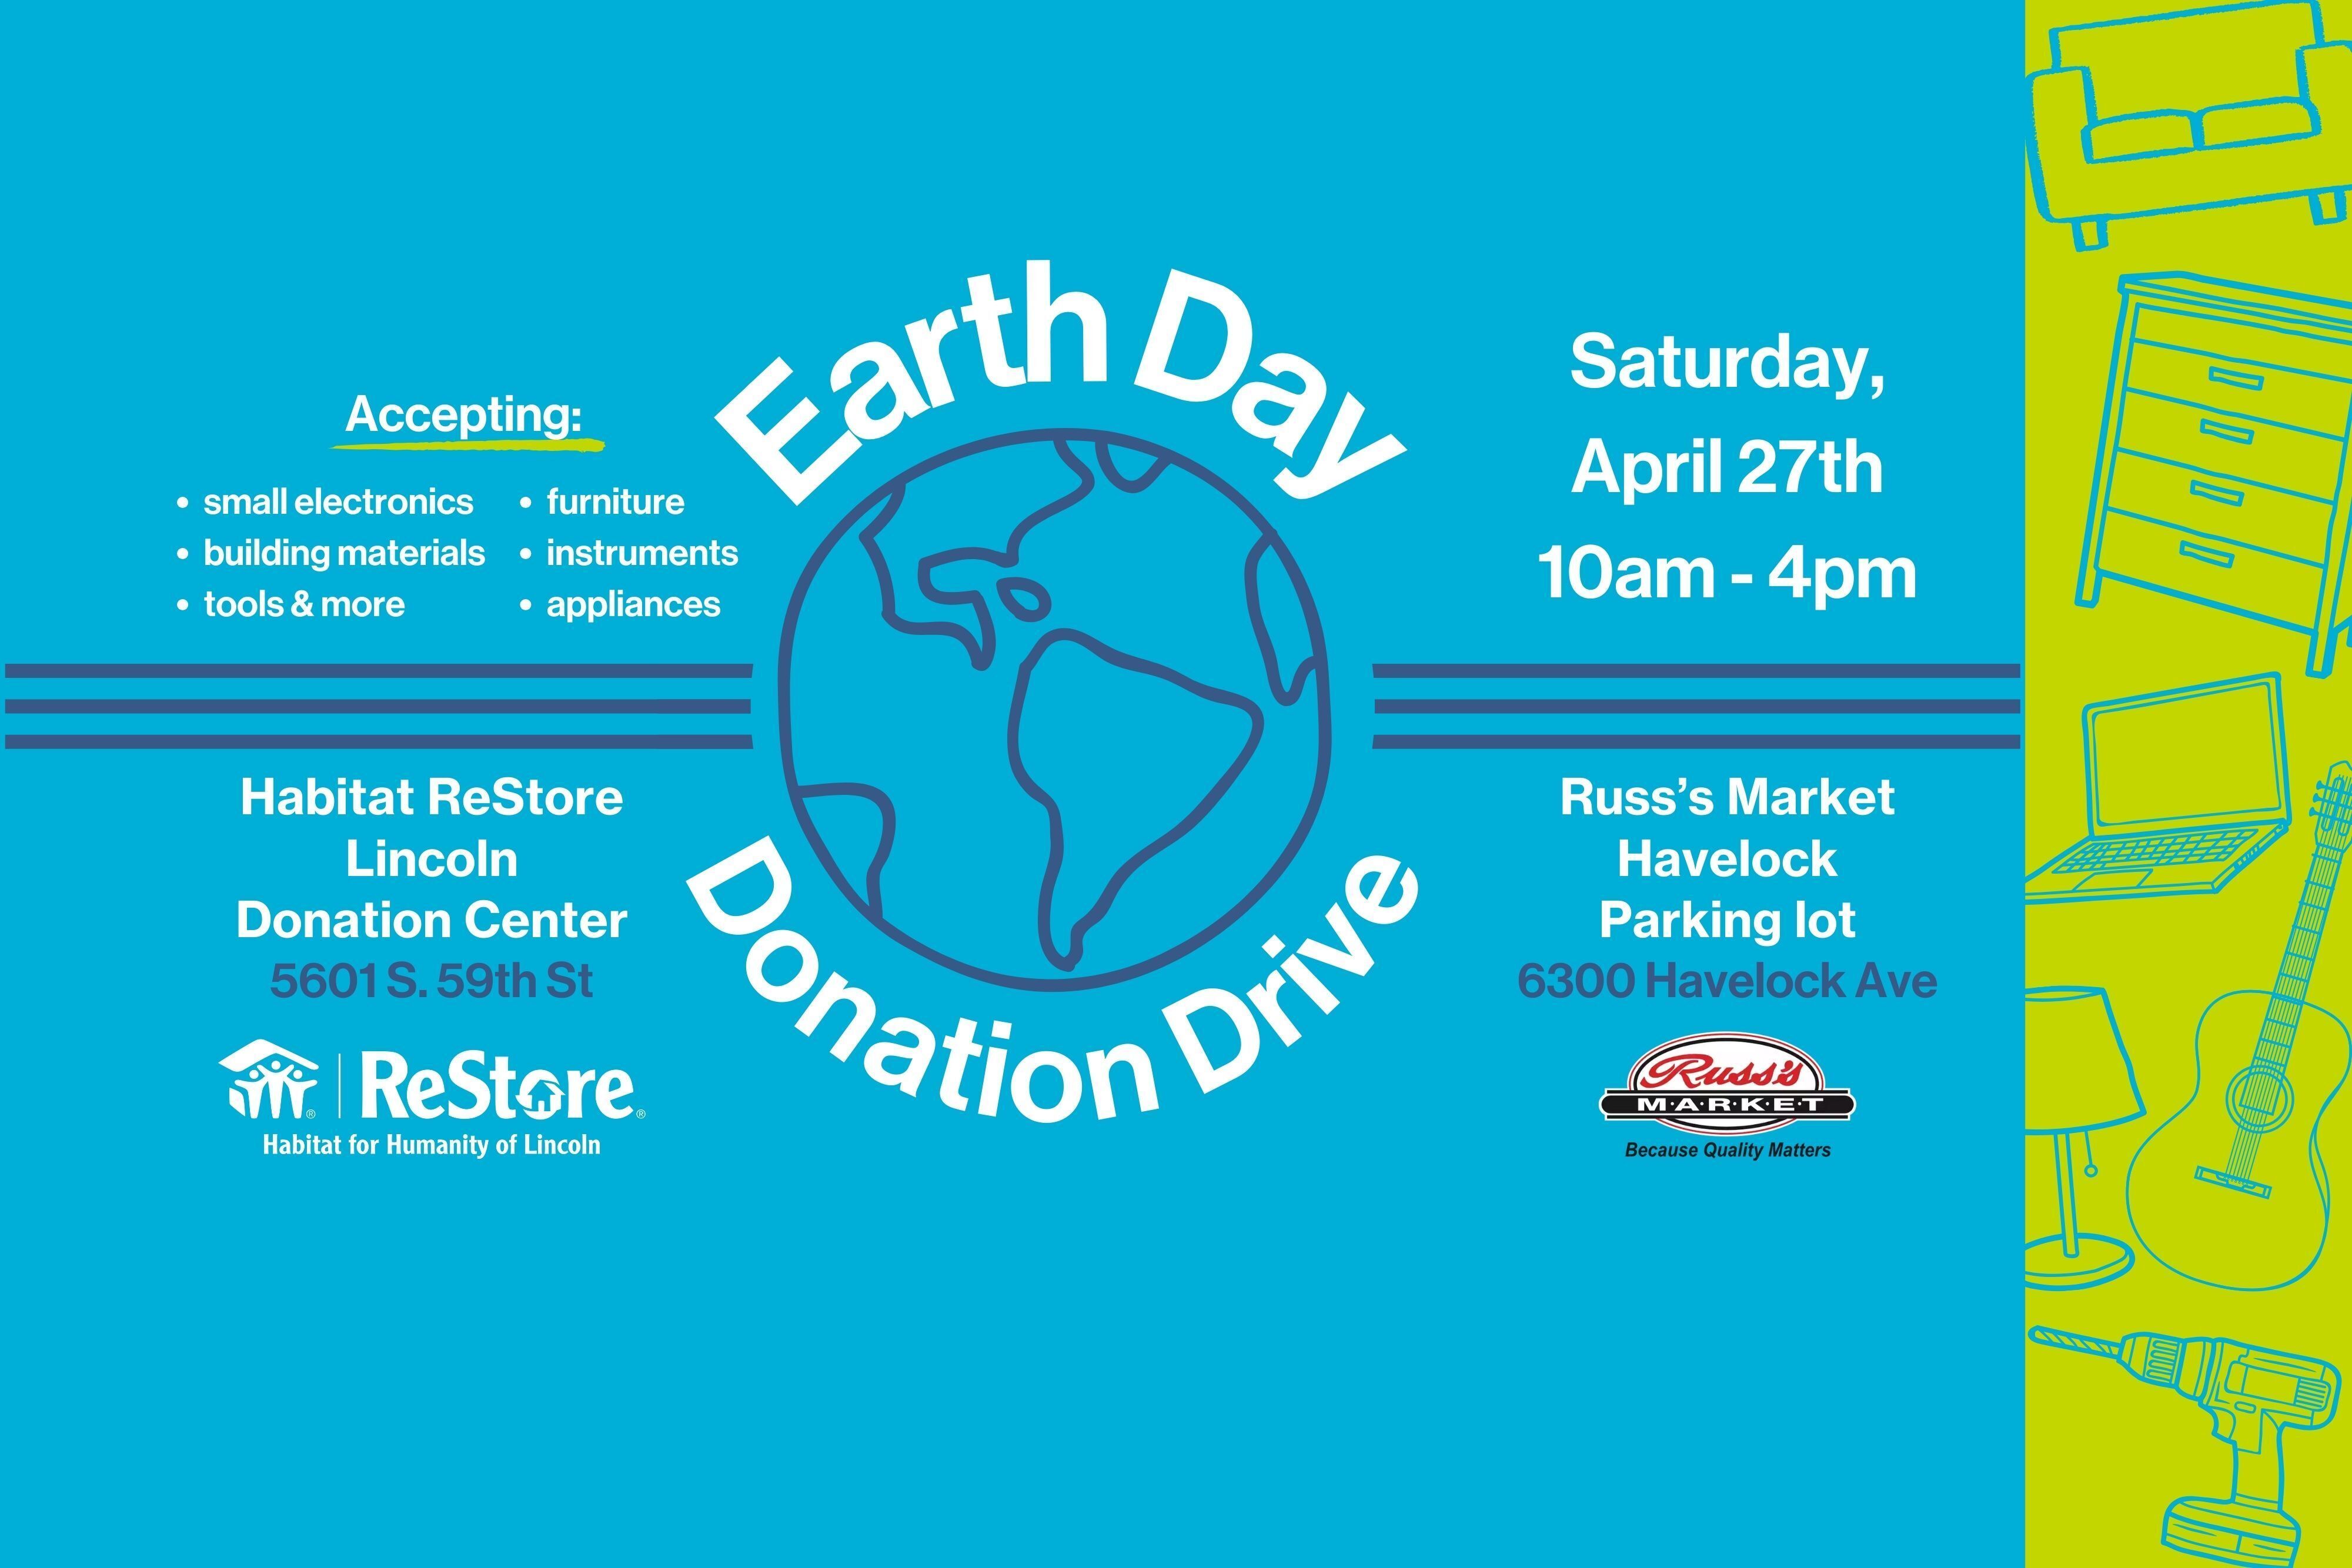 Earth Day Donation Drive